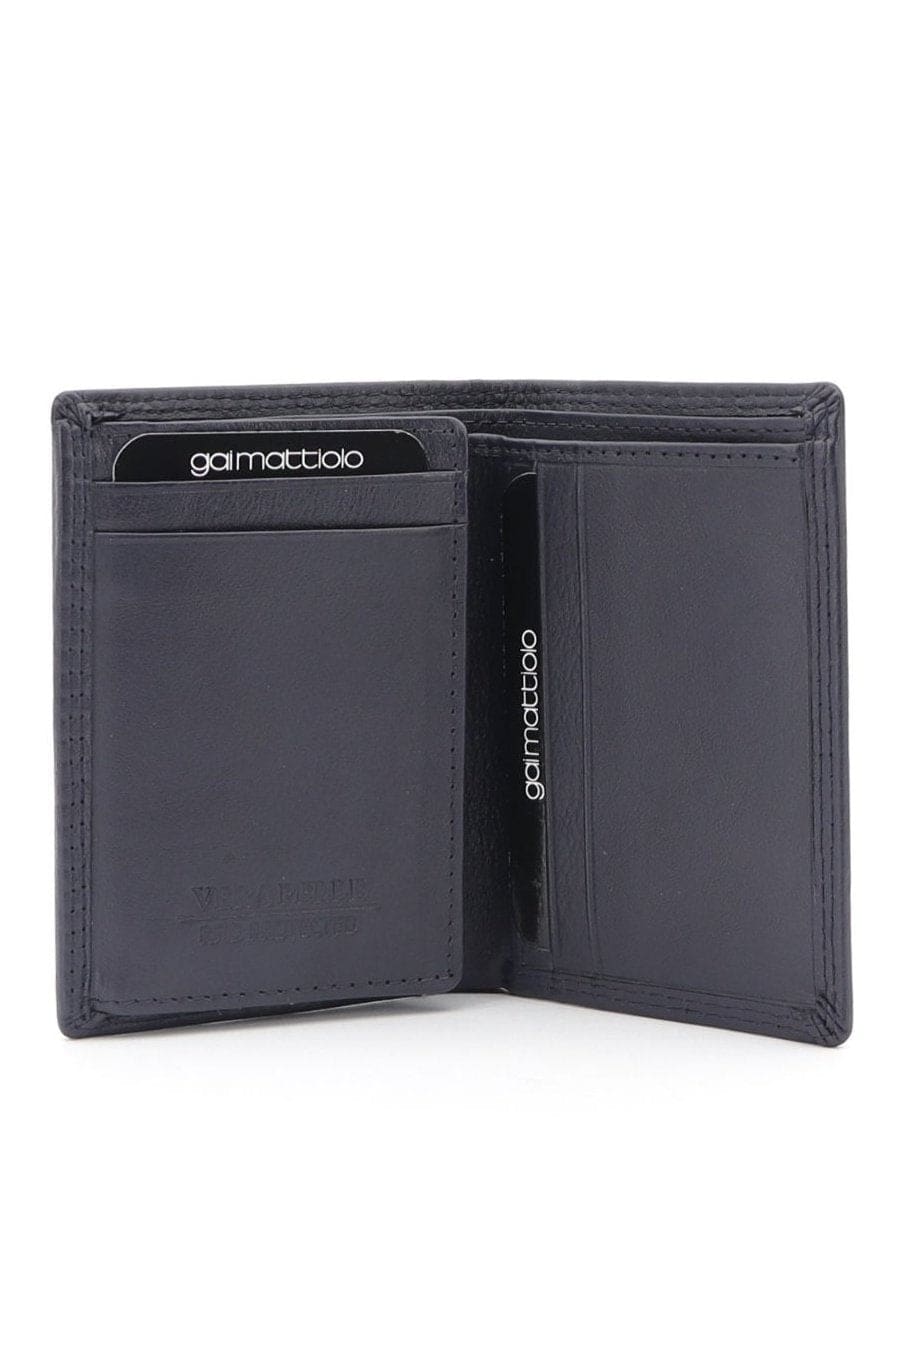 Gai Mattiolo leather wallet, Equipped with spaces for credit cards, a space with mesh for documents in card format and banknotes, Blue Fatio General Trading